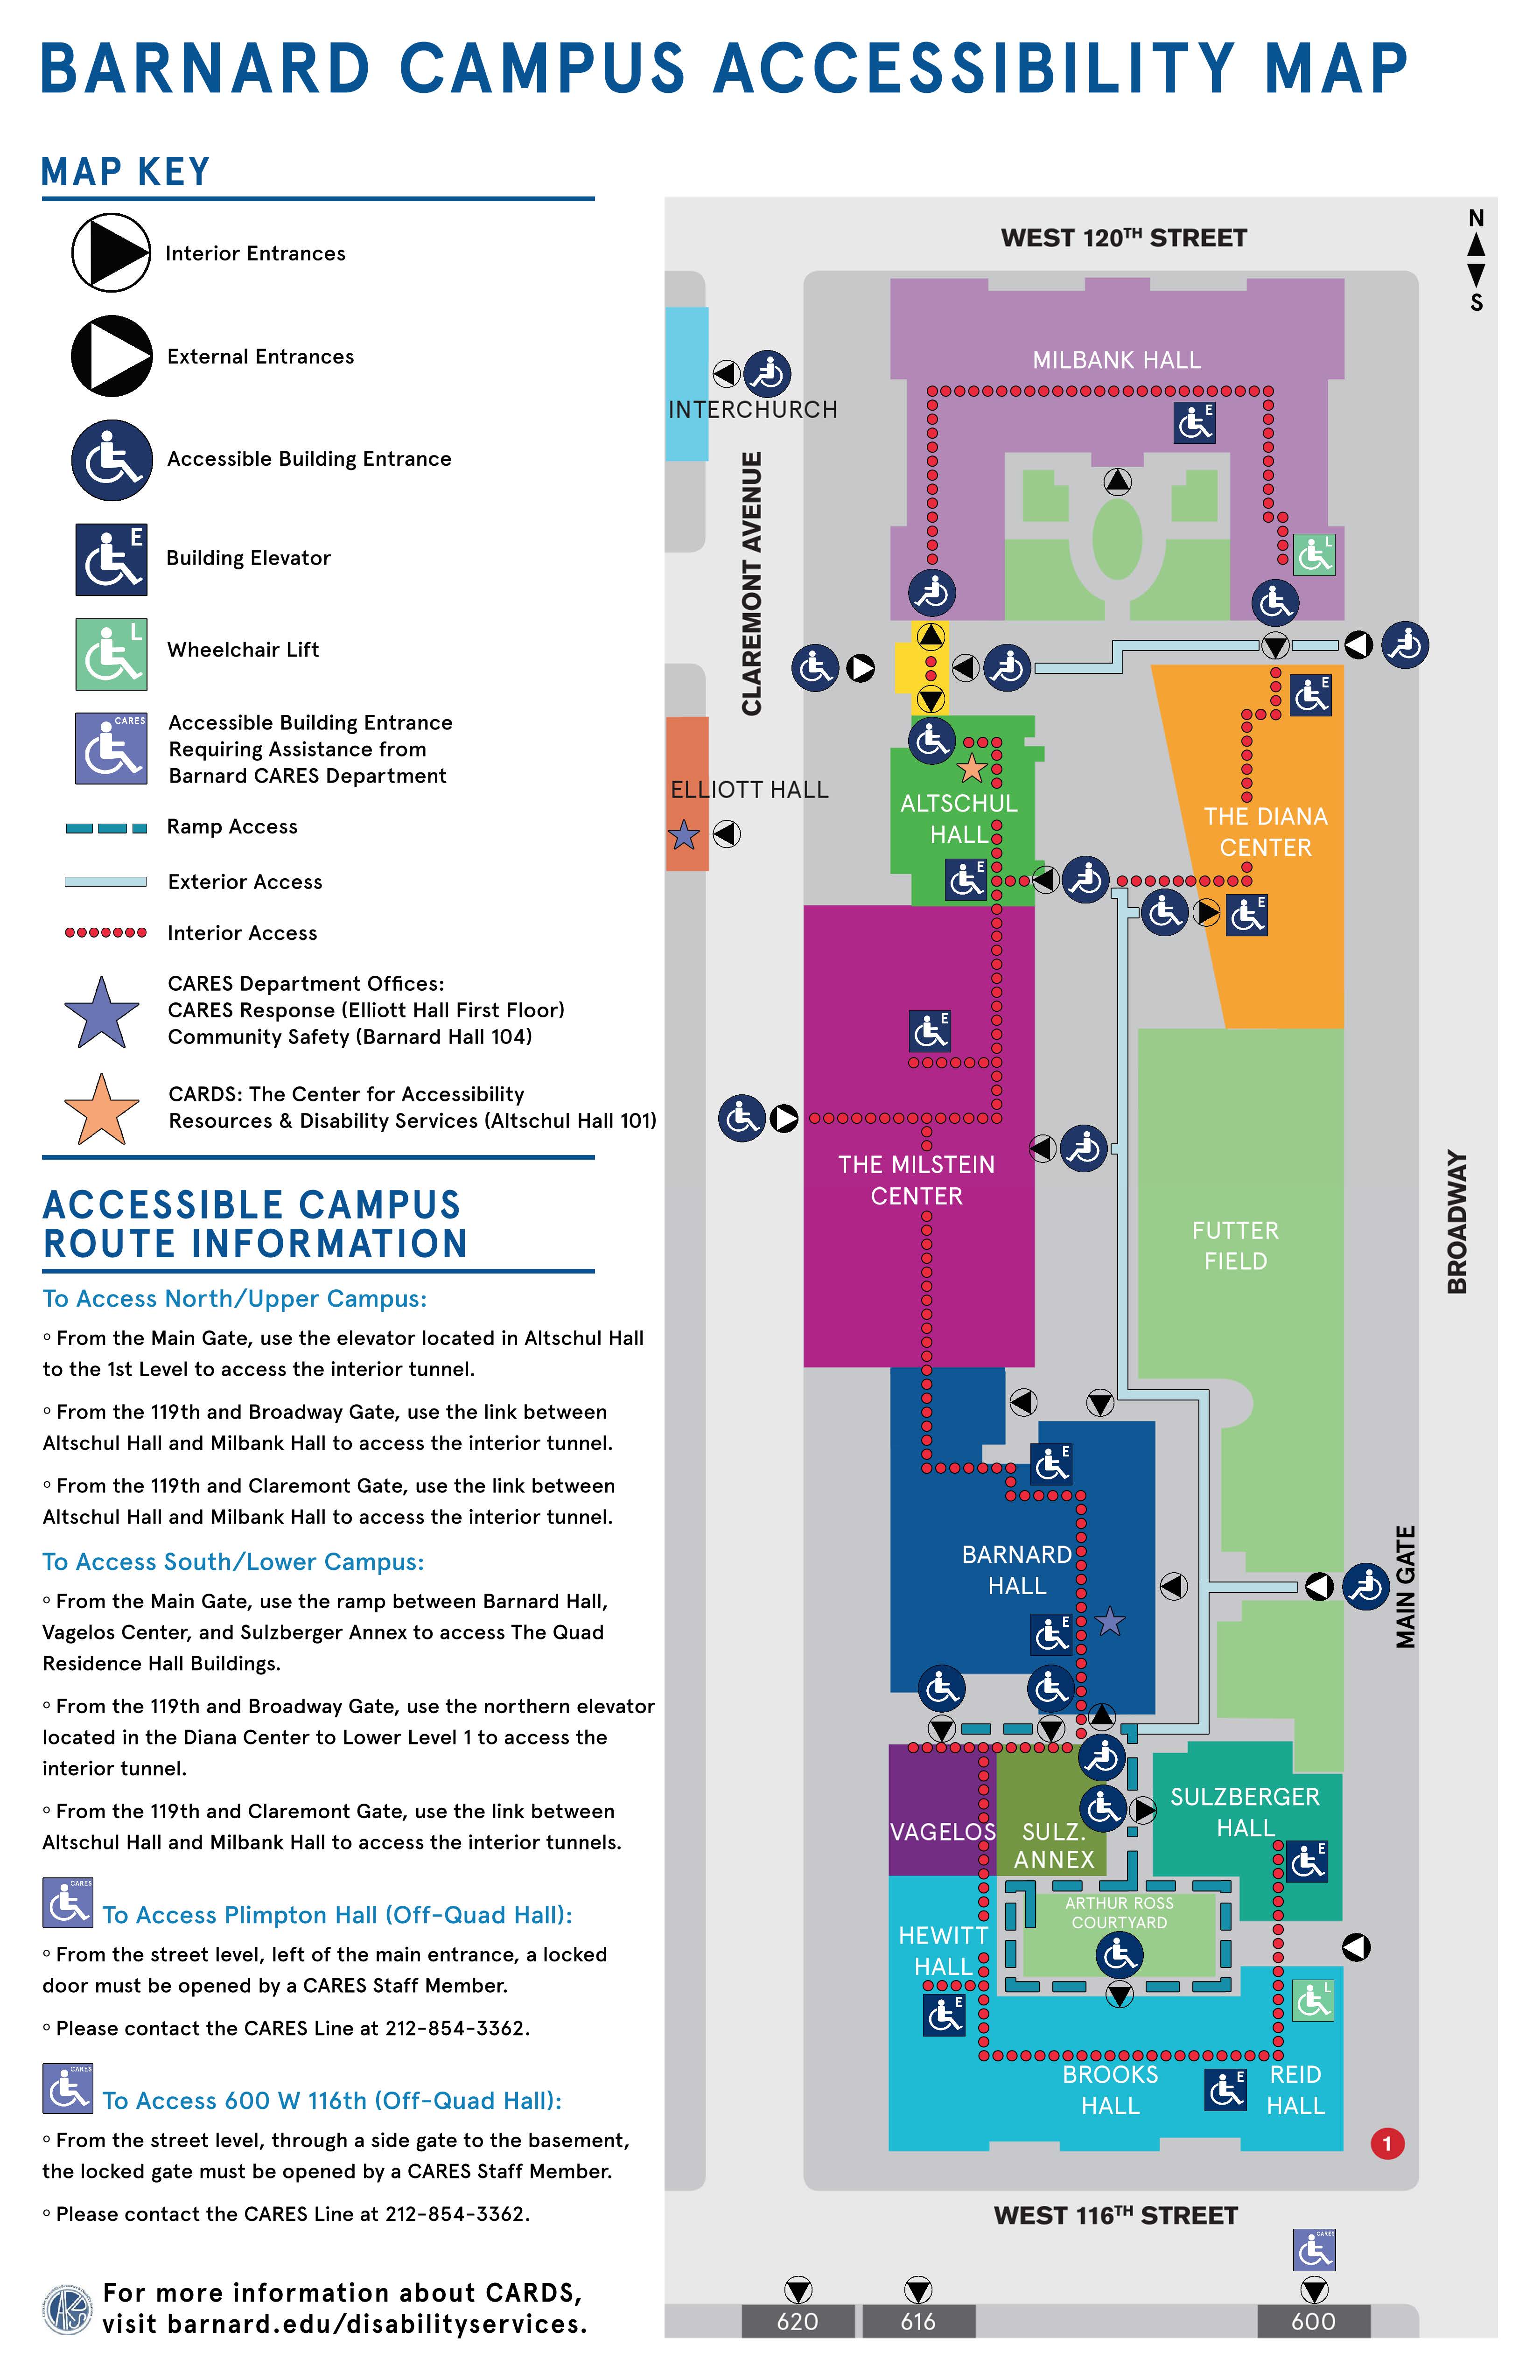 Map of Barnard campus showing wheelchair accessible entrances and wheelchair accessible routes. Accessible entrances to campus are at the main gate and at the 119th street entrance. The wheelchair accessible route through campus is via the tunnels between Sulzberger Hall through Milbank Hall. For more information, contact CARDS at cards@barnard.edu